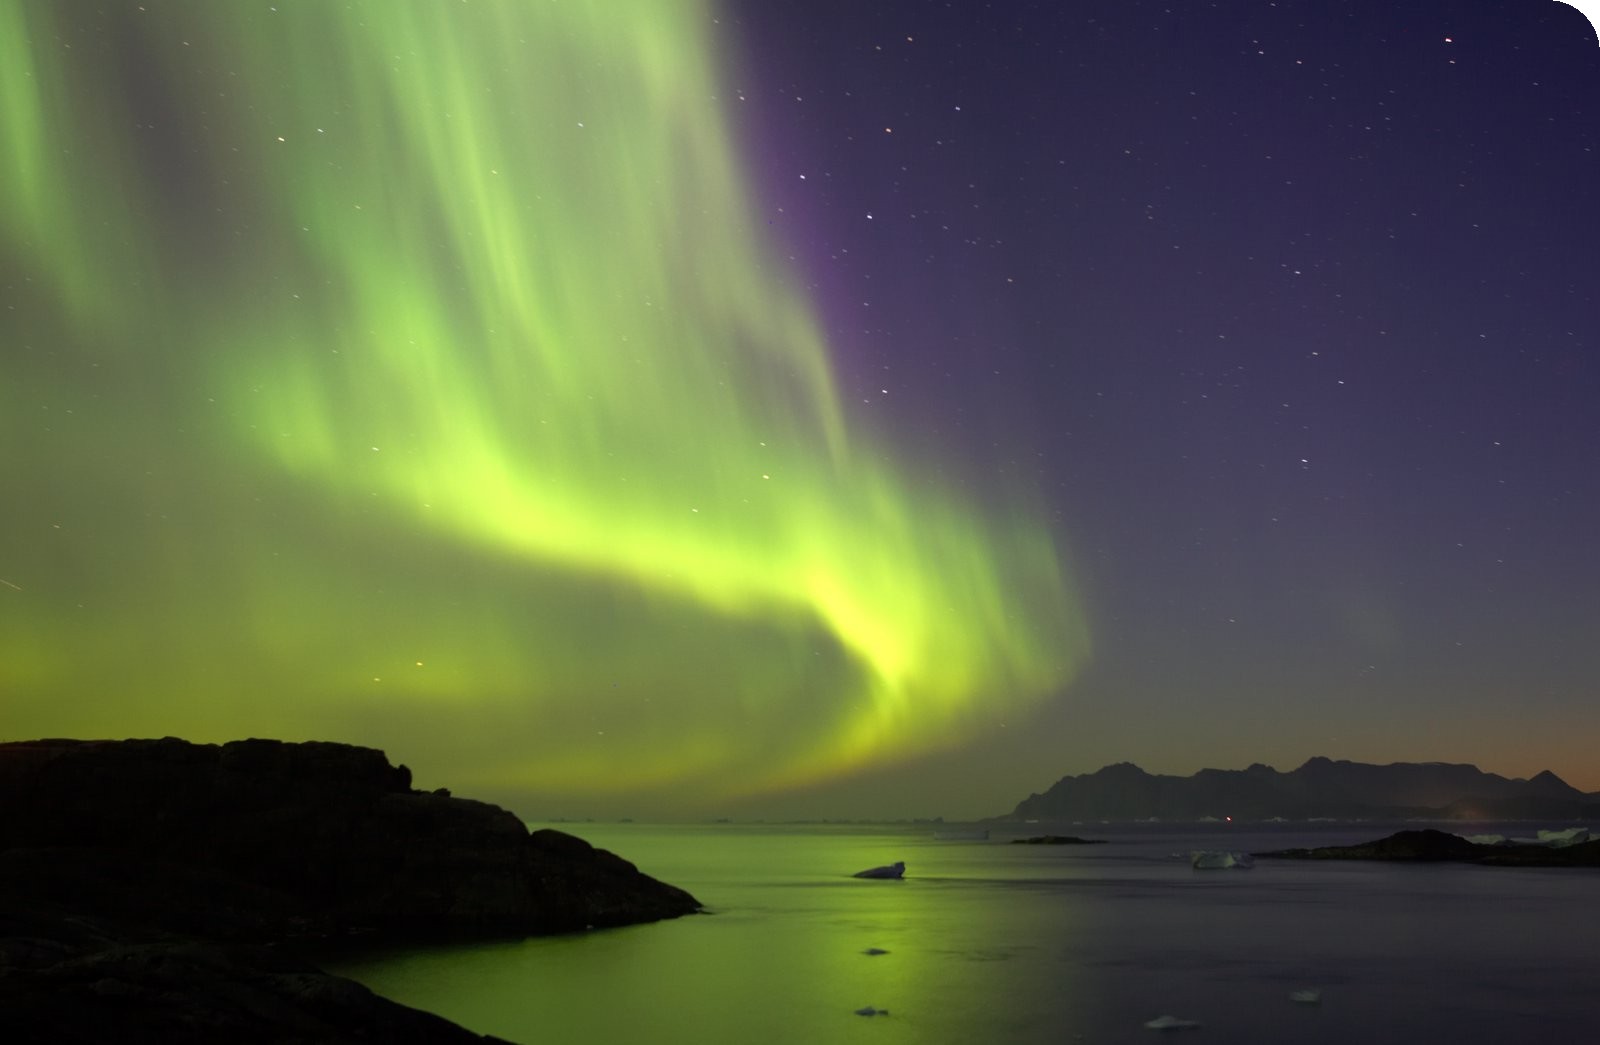 http://www.greenlandholiday.com/Portals/0/Photos/Northern%20Lights%20over%20the%20fjords.jpg